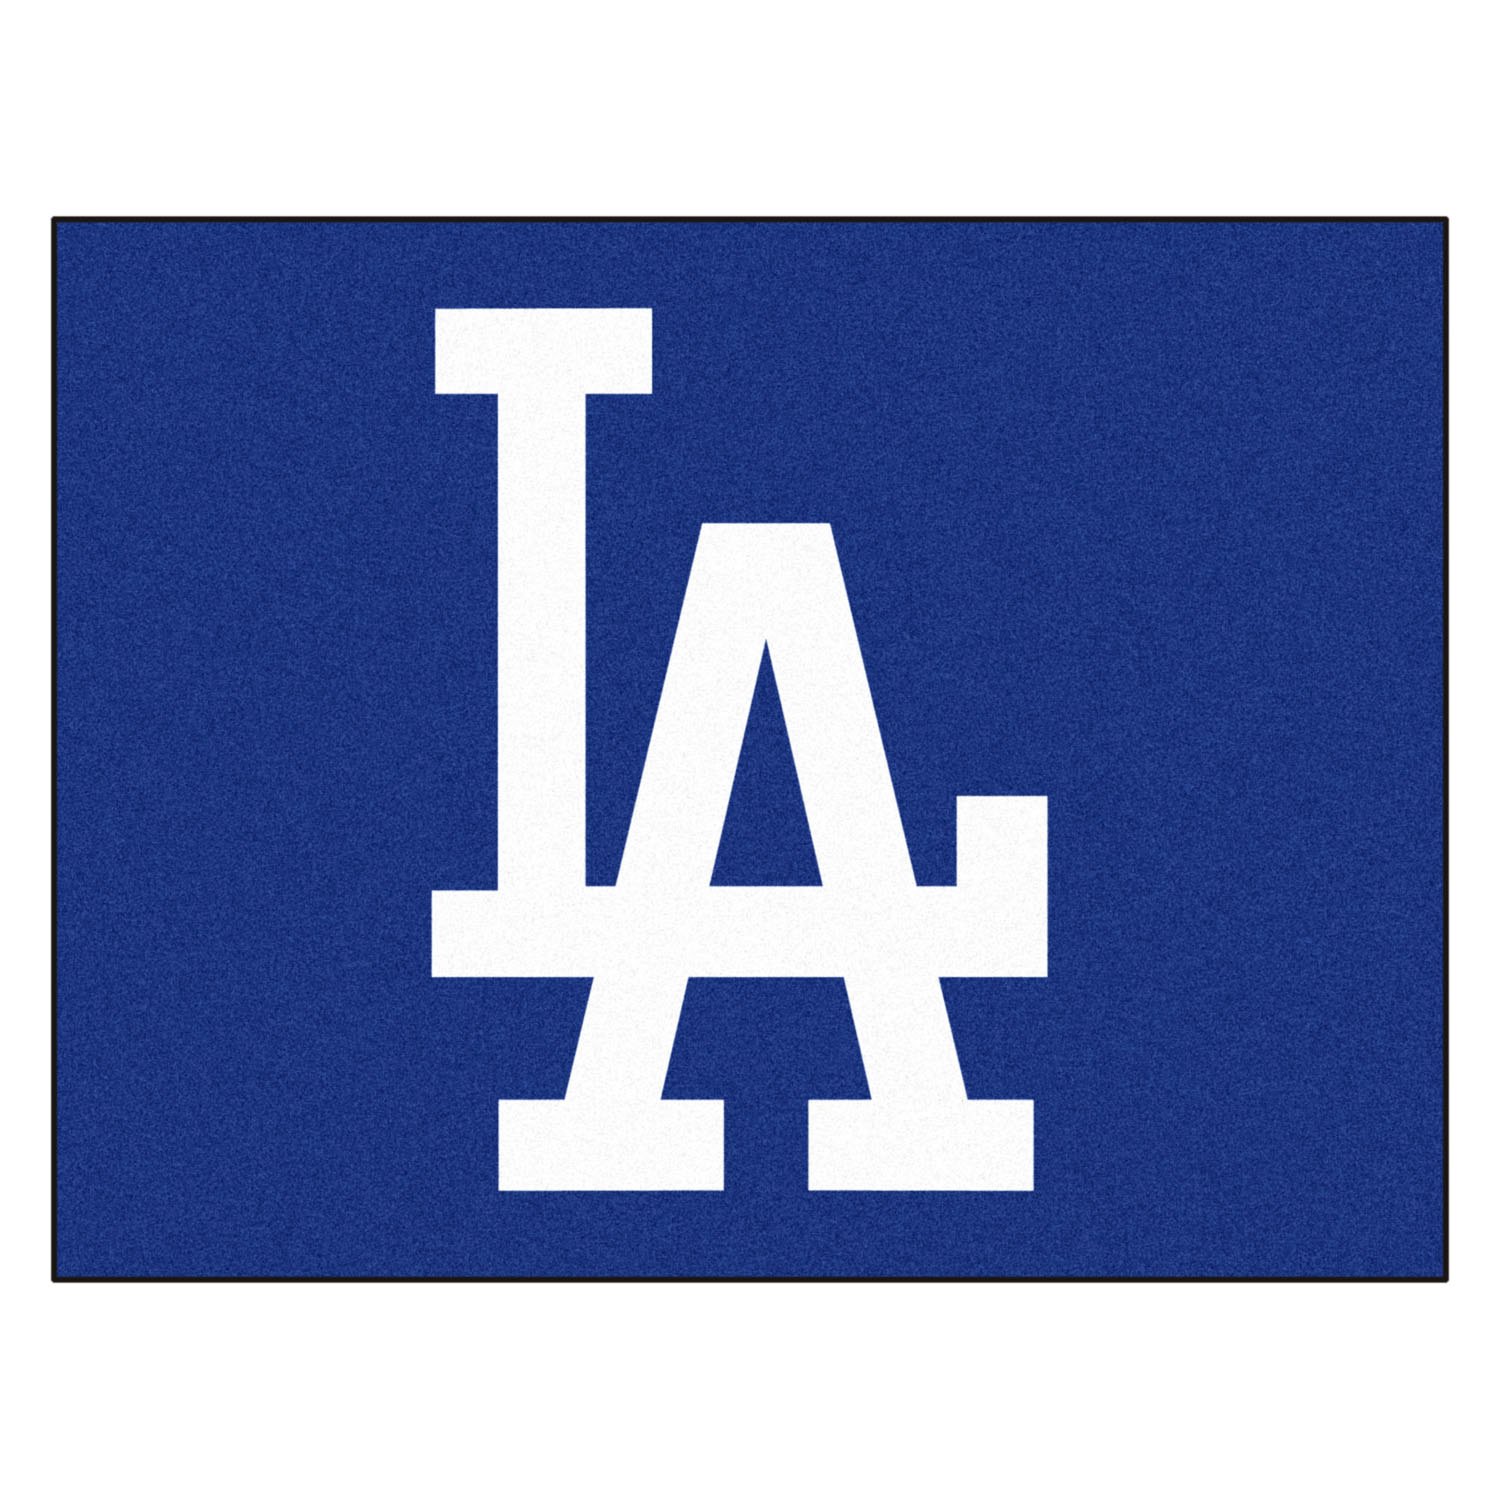 FANMATS MLB Los Angeles Dodgers Photorealistic 27 in. Round